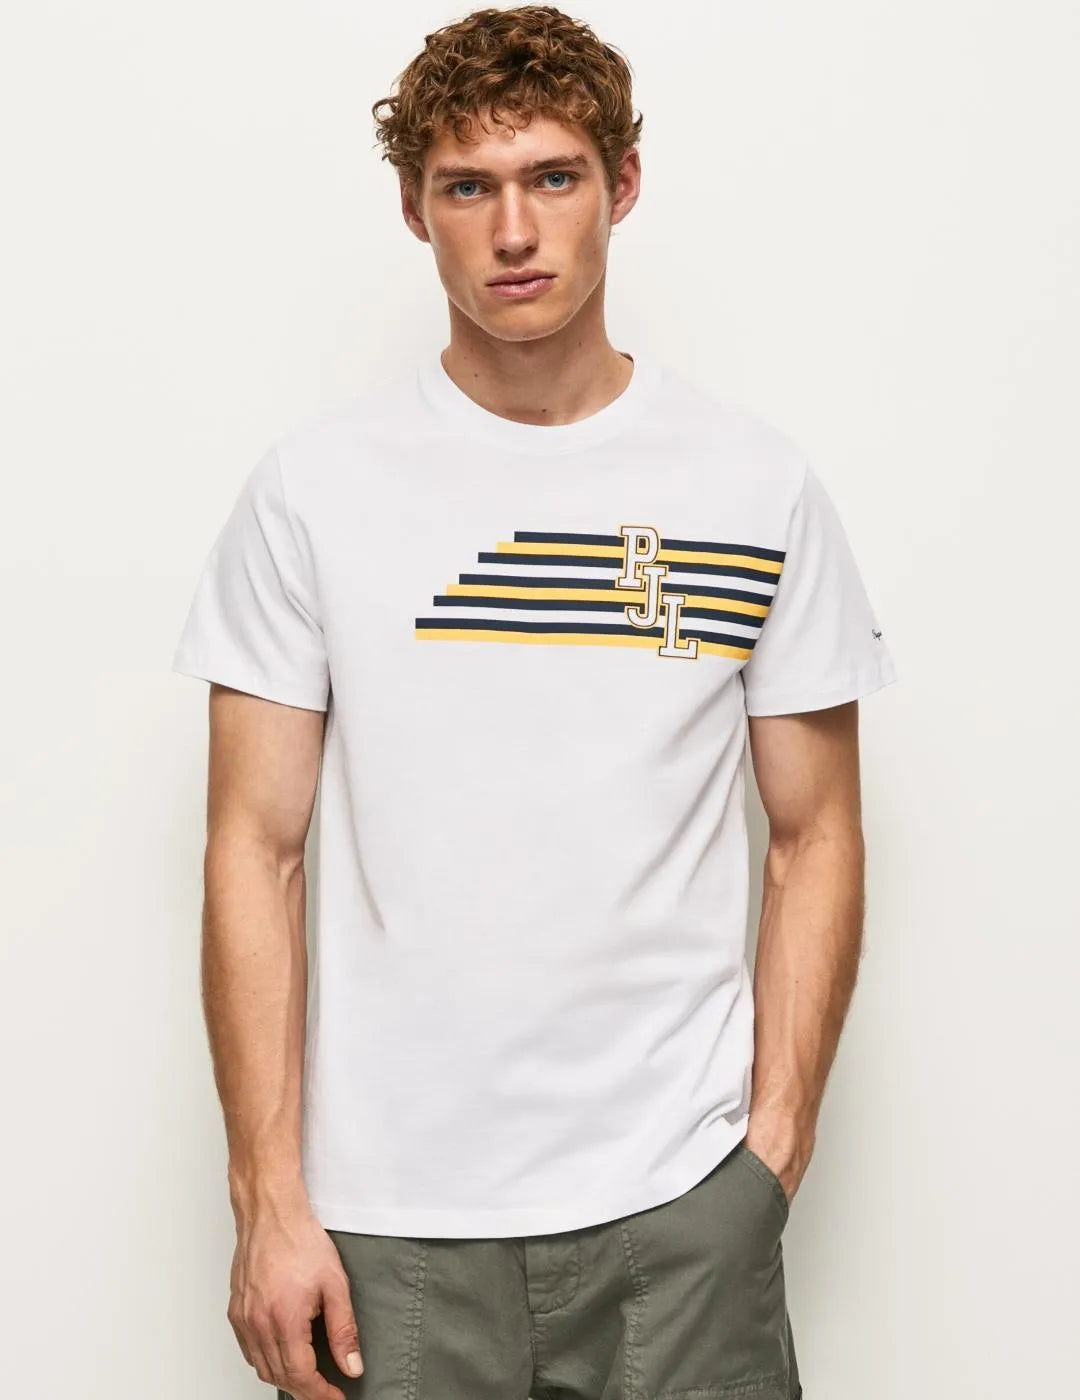 White Pepe Jeans Men's T-Shirt (PM508709) with bold Rooney logo lettering